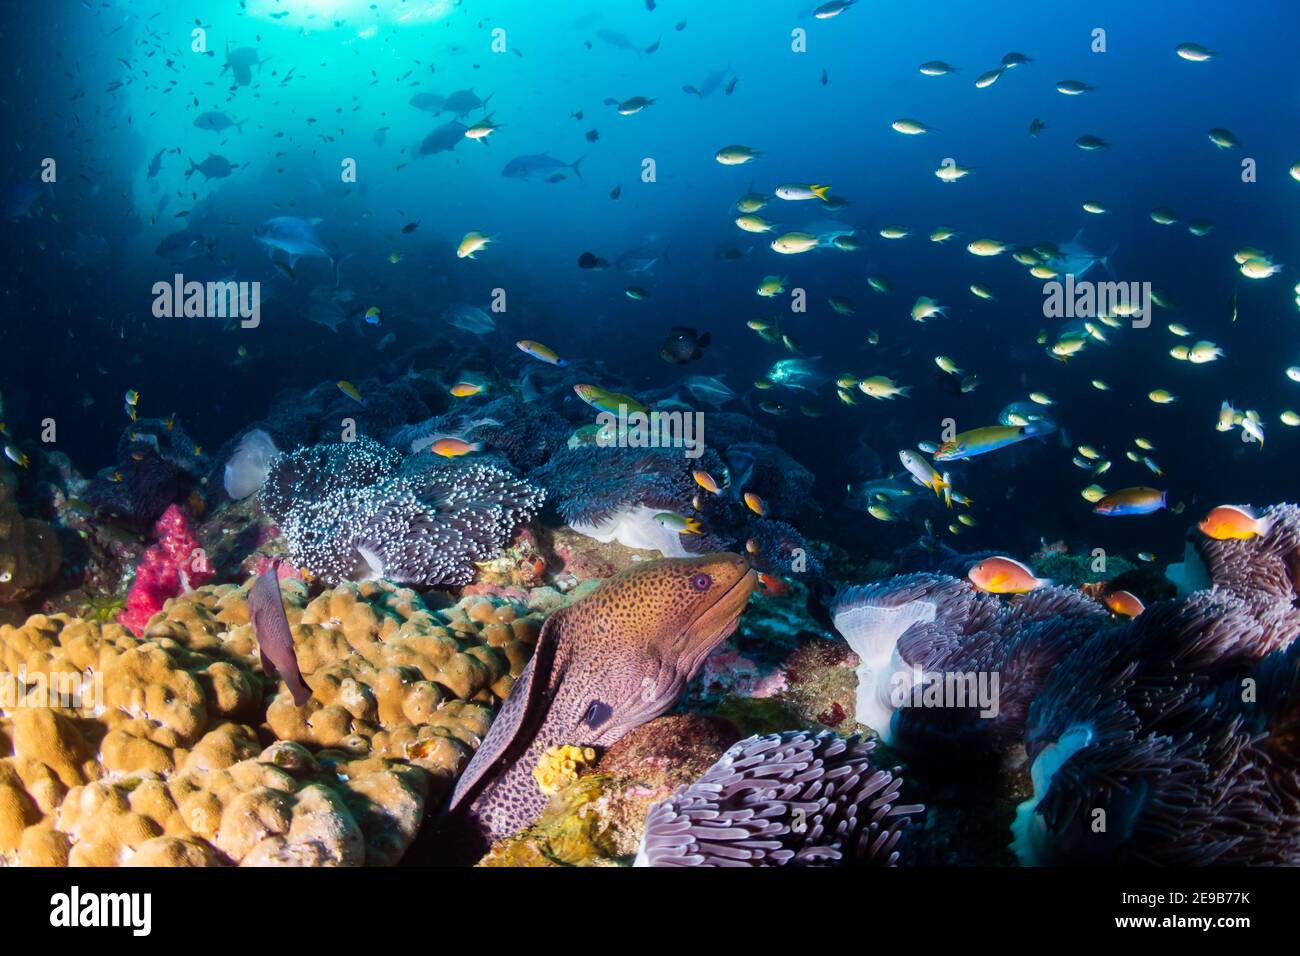 Giant Moray Eel hiding on a healthy, colorful coral reef. Stock Photo